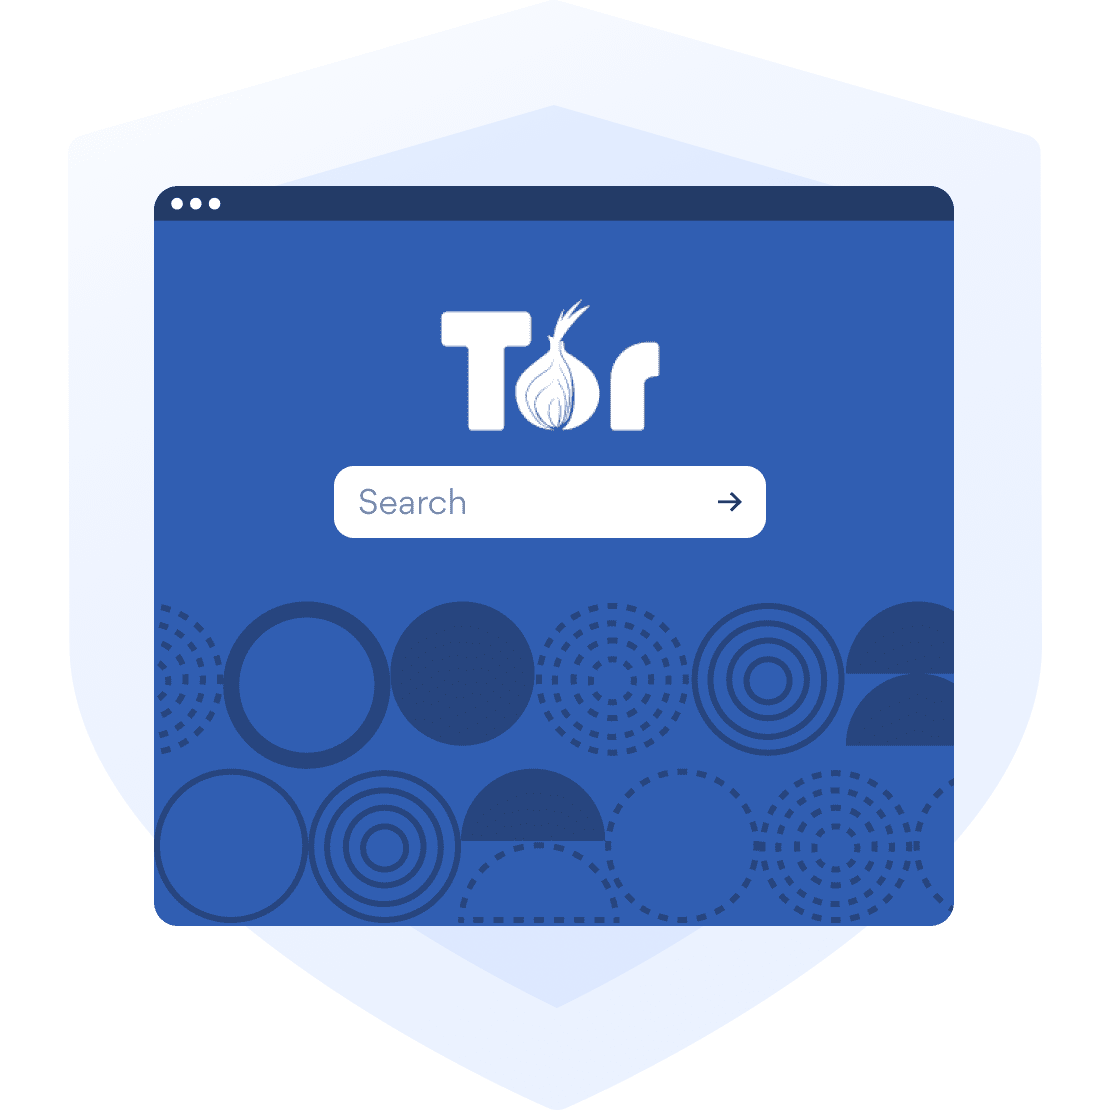 how to use tor browser with nordvpn